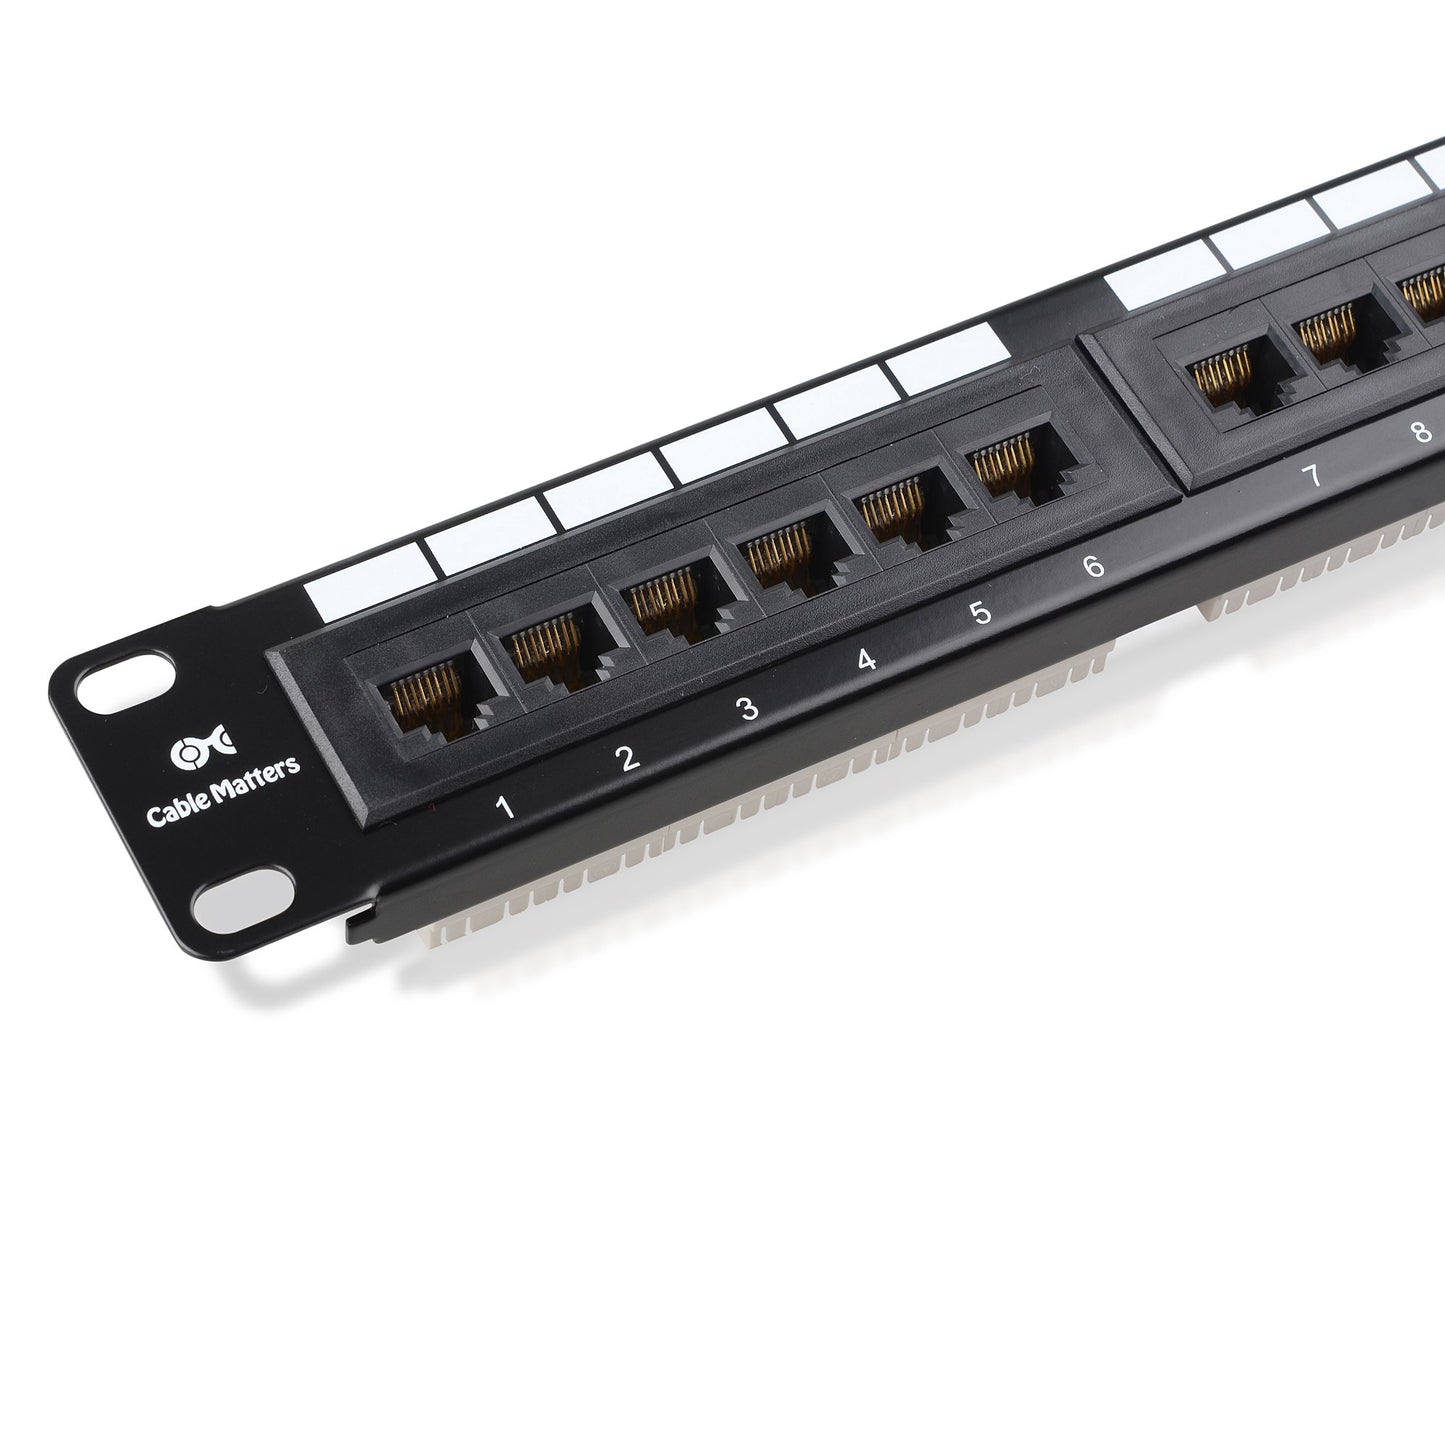 Cable Matters UL Listed Rackmount or Wall Mount 24 Port Network Patch Panel (Cat6 Patch Panel / RJ45 Patch Panel)